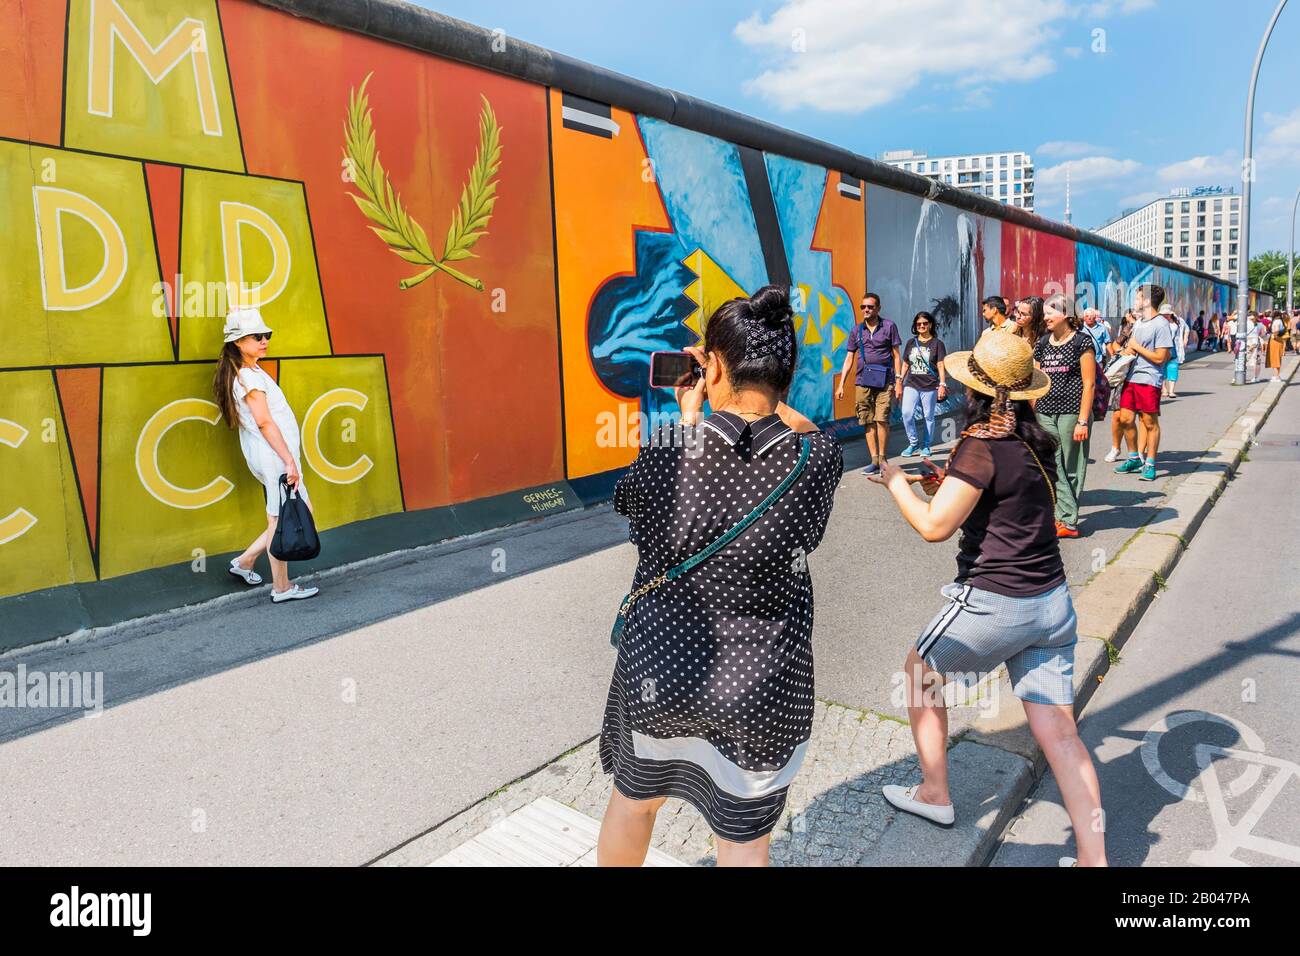 visitors at east side gallery, asian woman posing Stock Photo